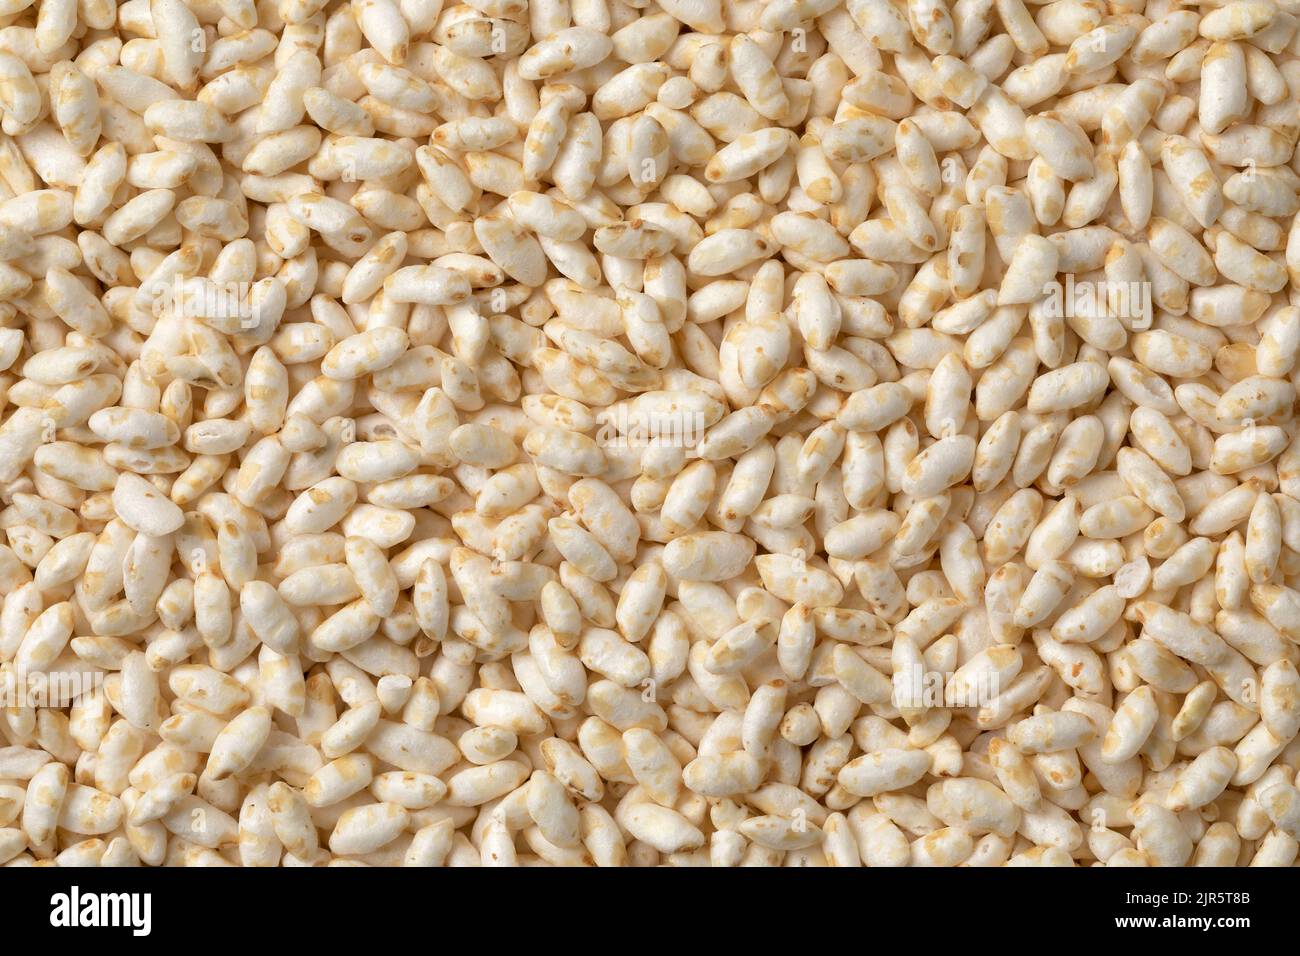 Healthy puffed rice close up full frame as background Stock Photo